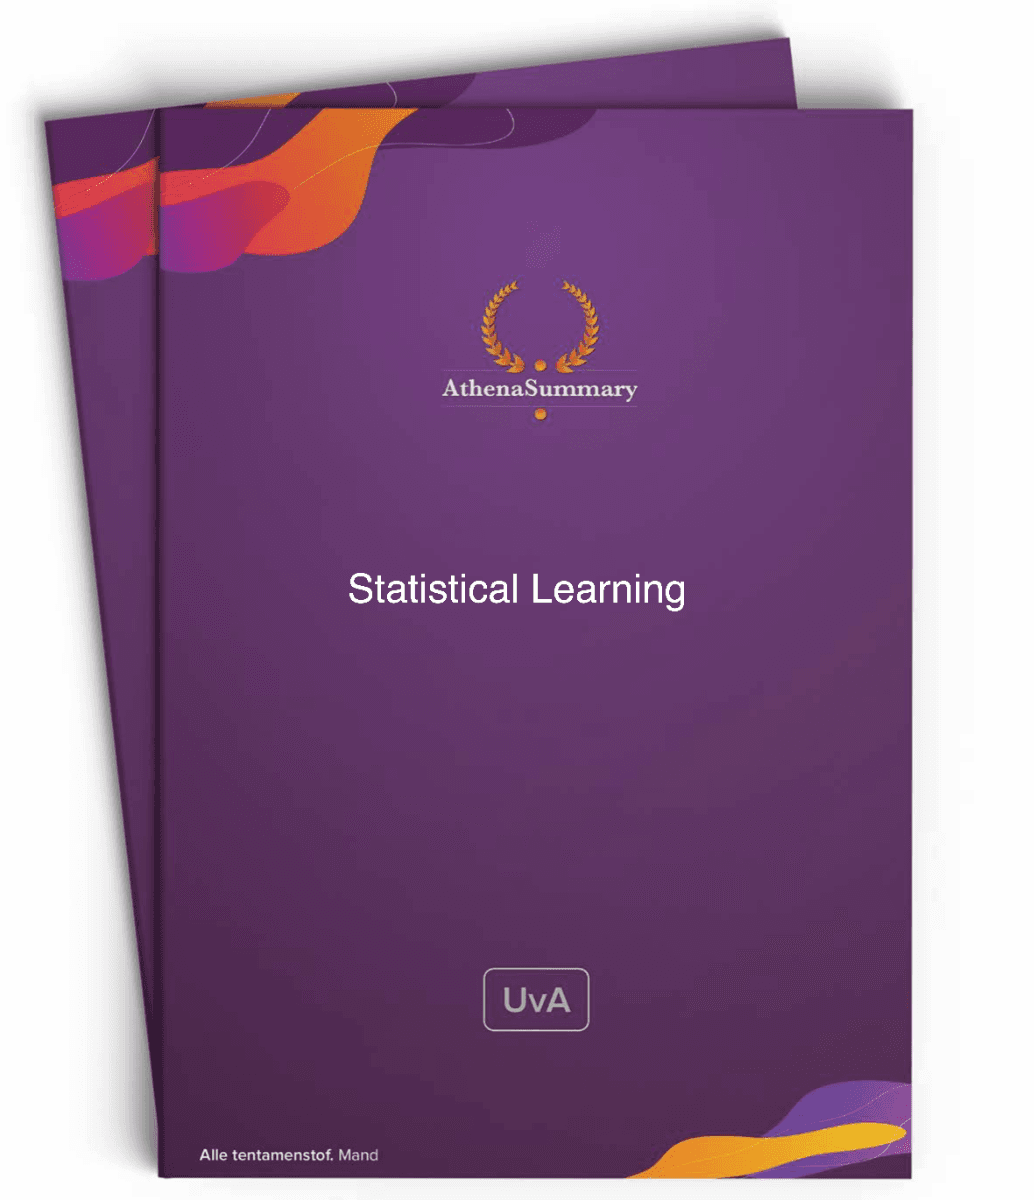 Literature Summary: Statistical Learning